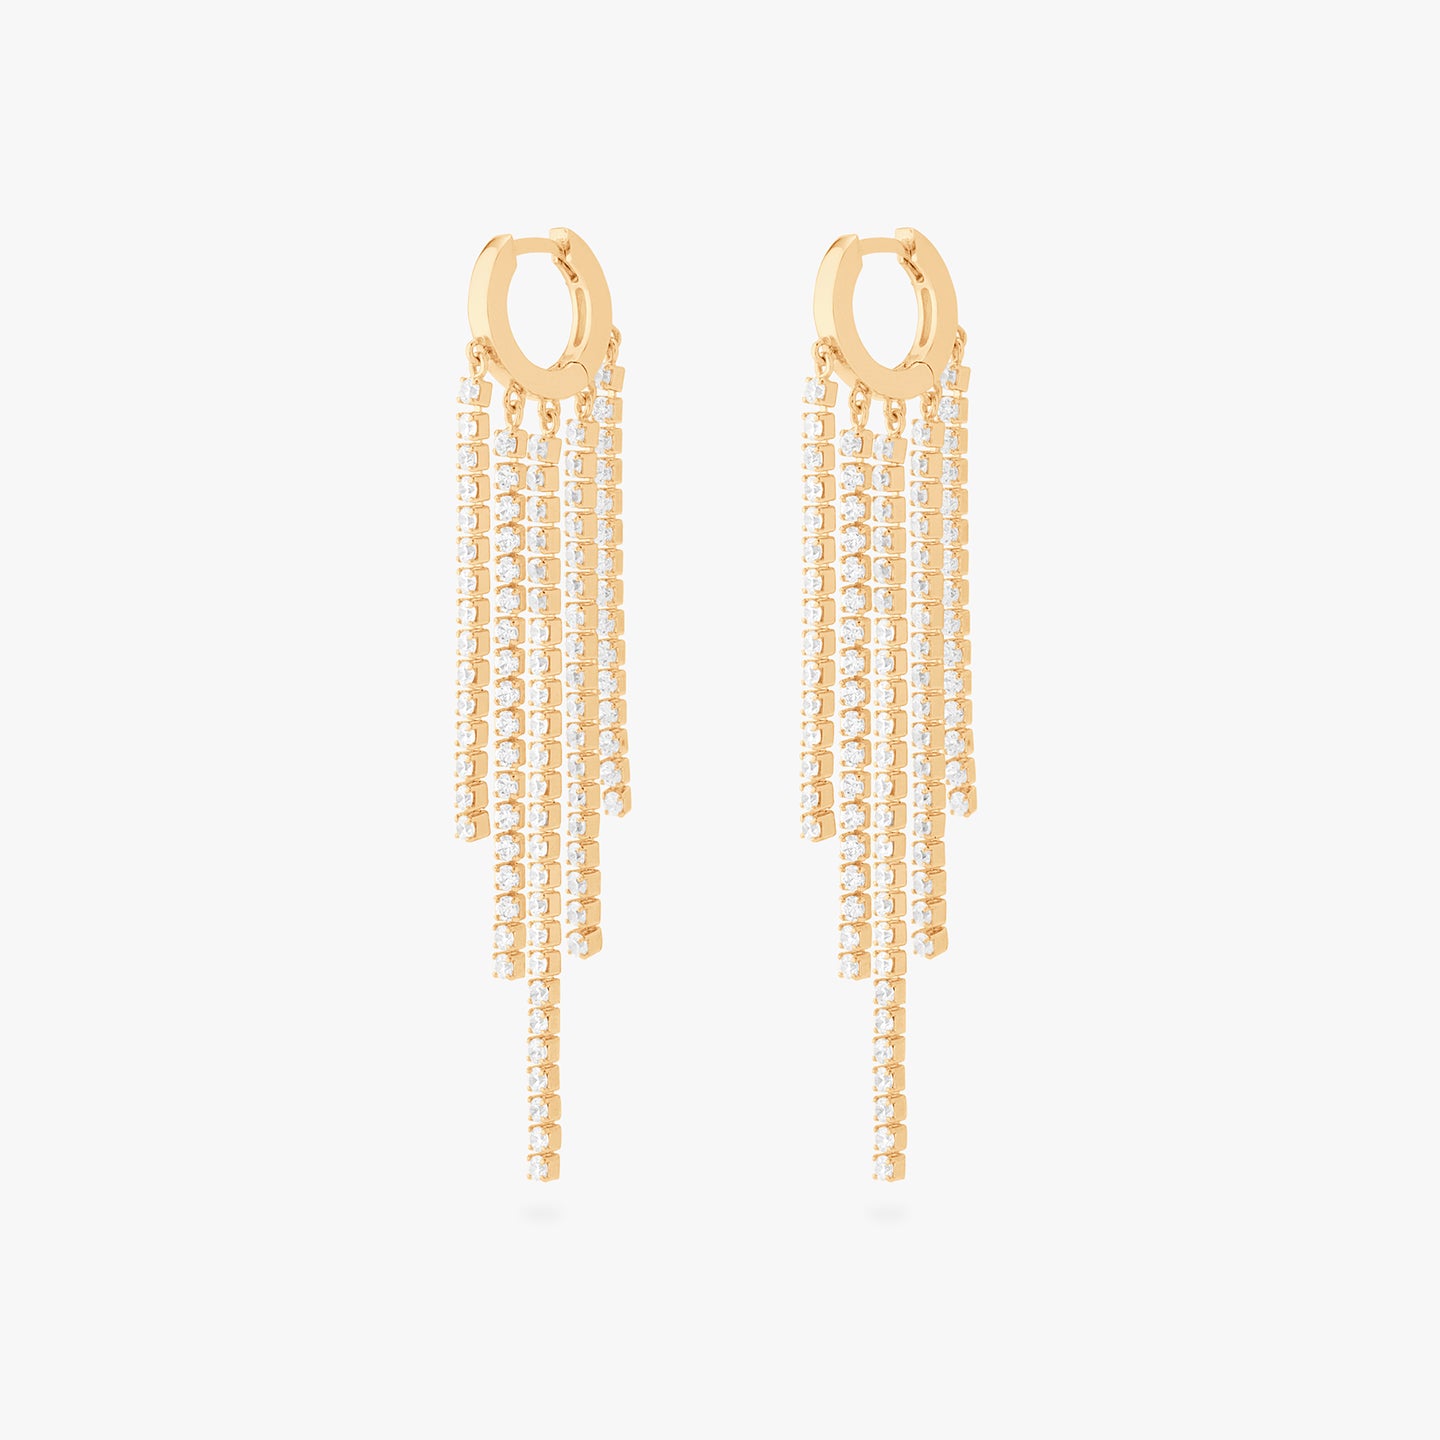 This is an image of a pair of gold huggies that have gold/clear CZ strands dangling from them in a fringed pattern. [pair] color:null|gold/clear